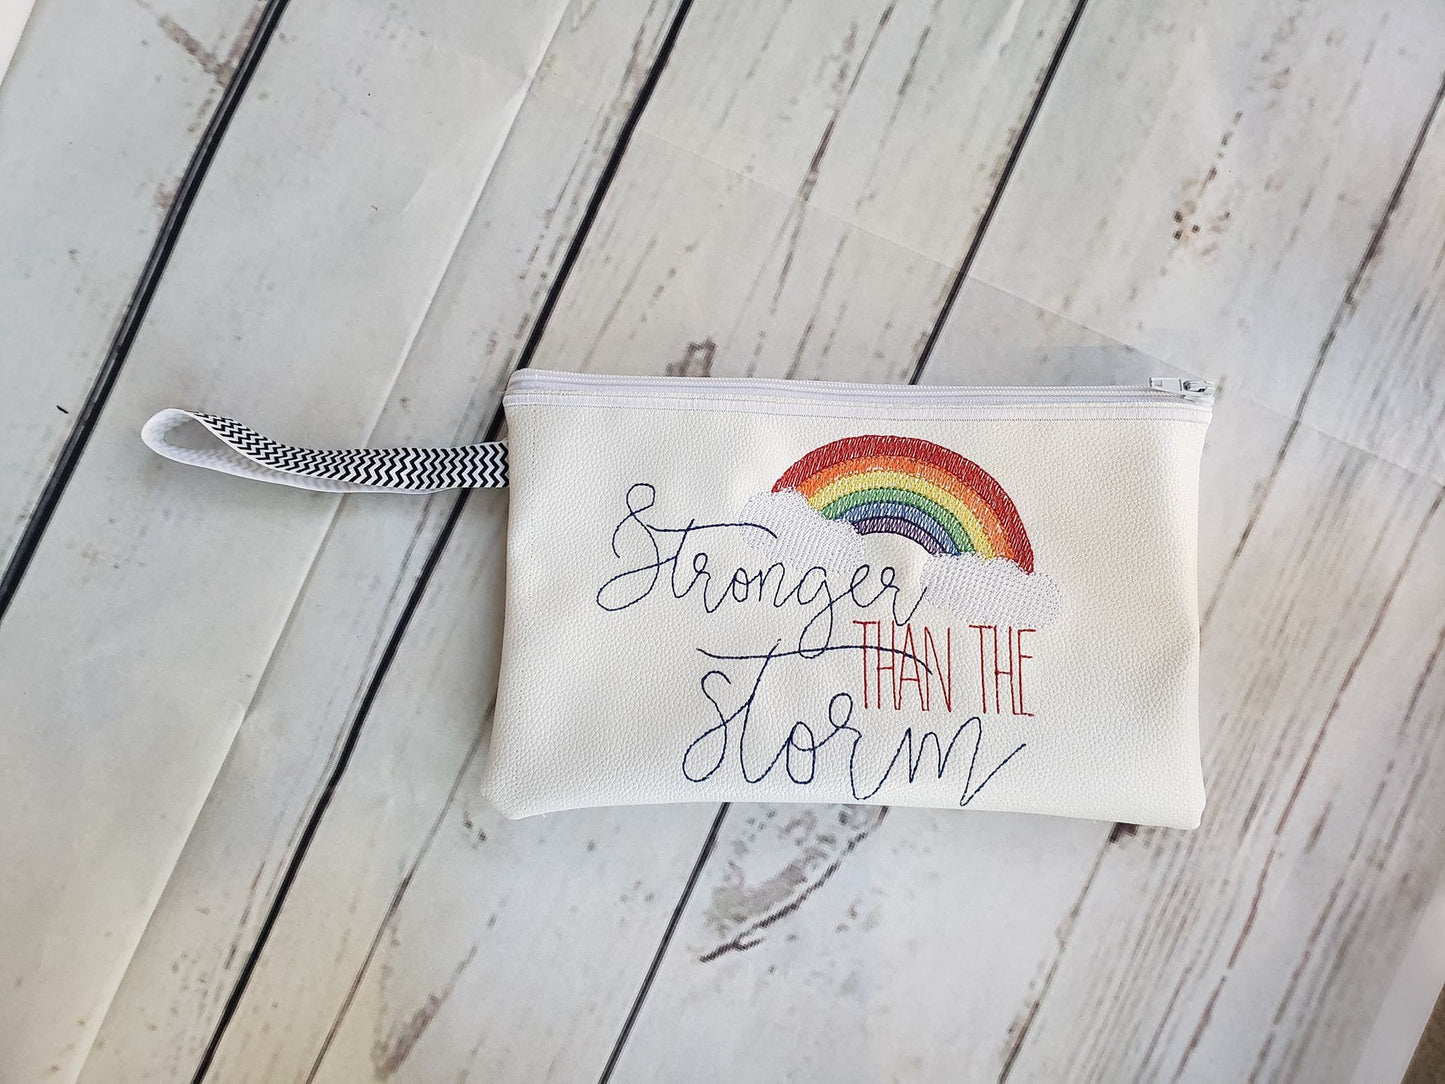 Stronger than the storm Zipper Bag - 3 sizes - Digital Embroidery Design